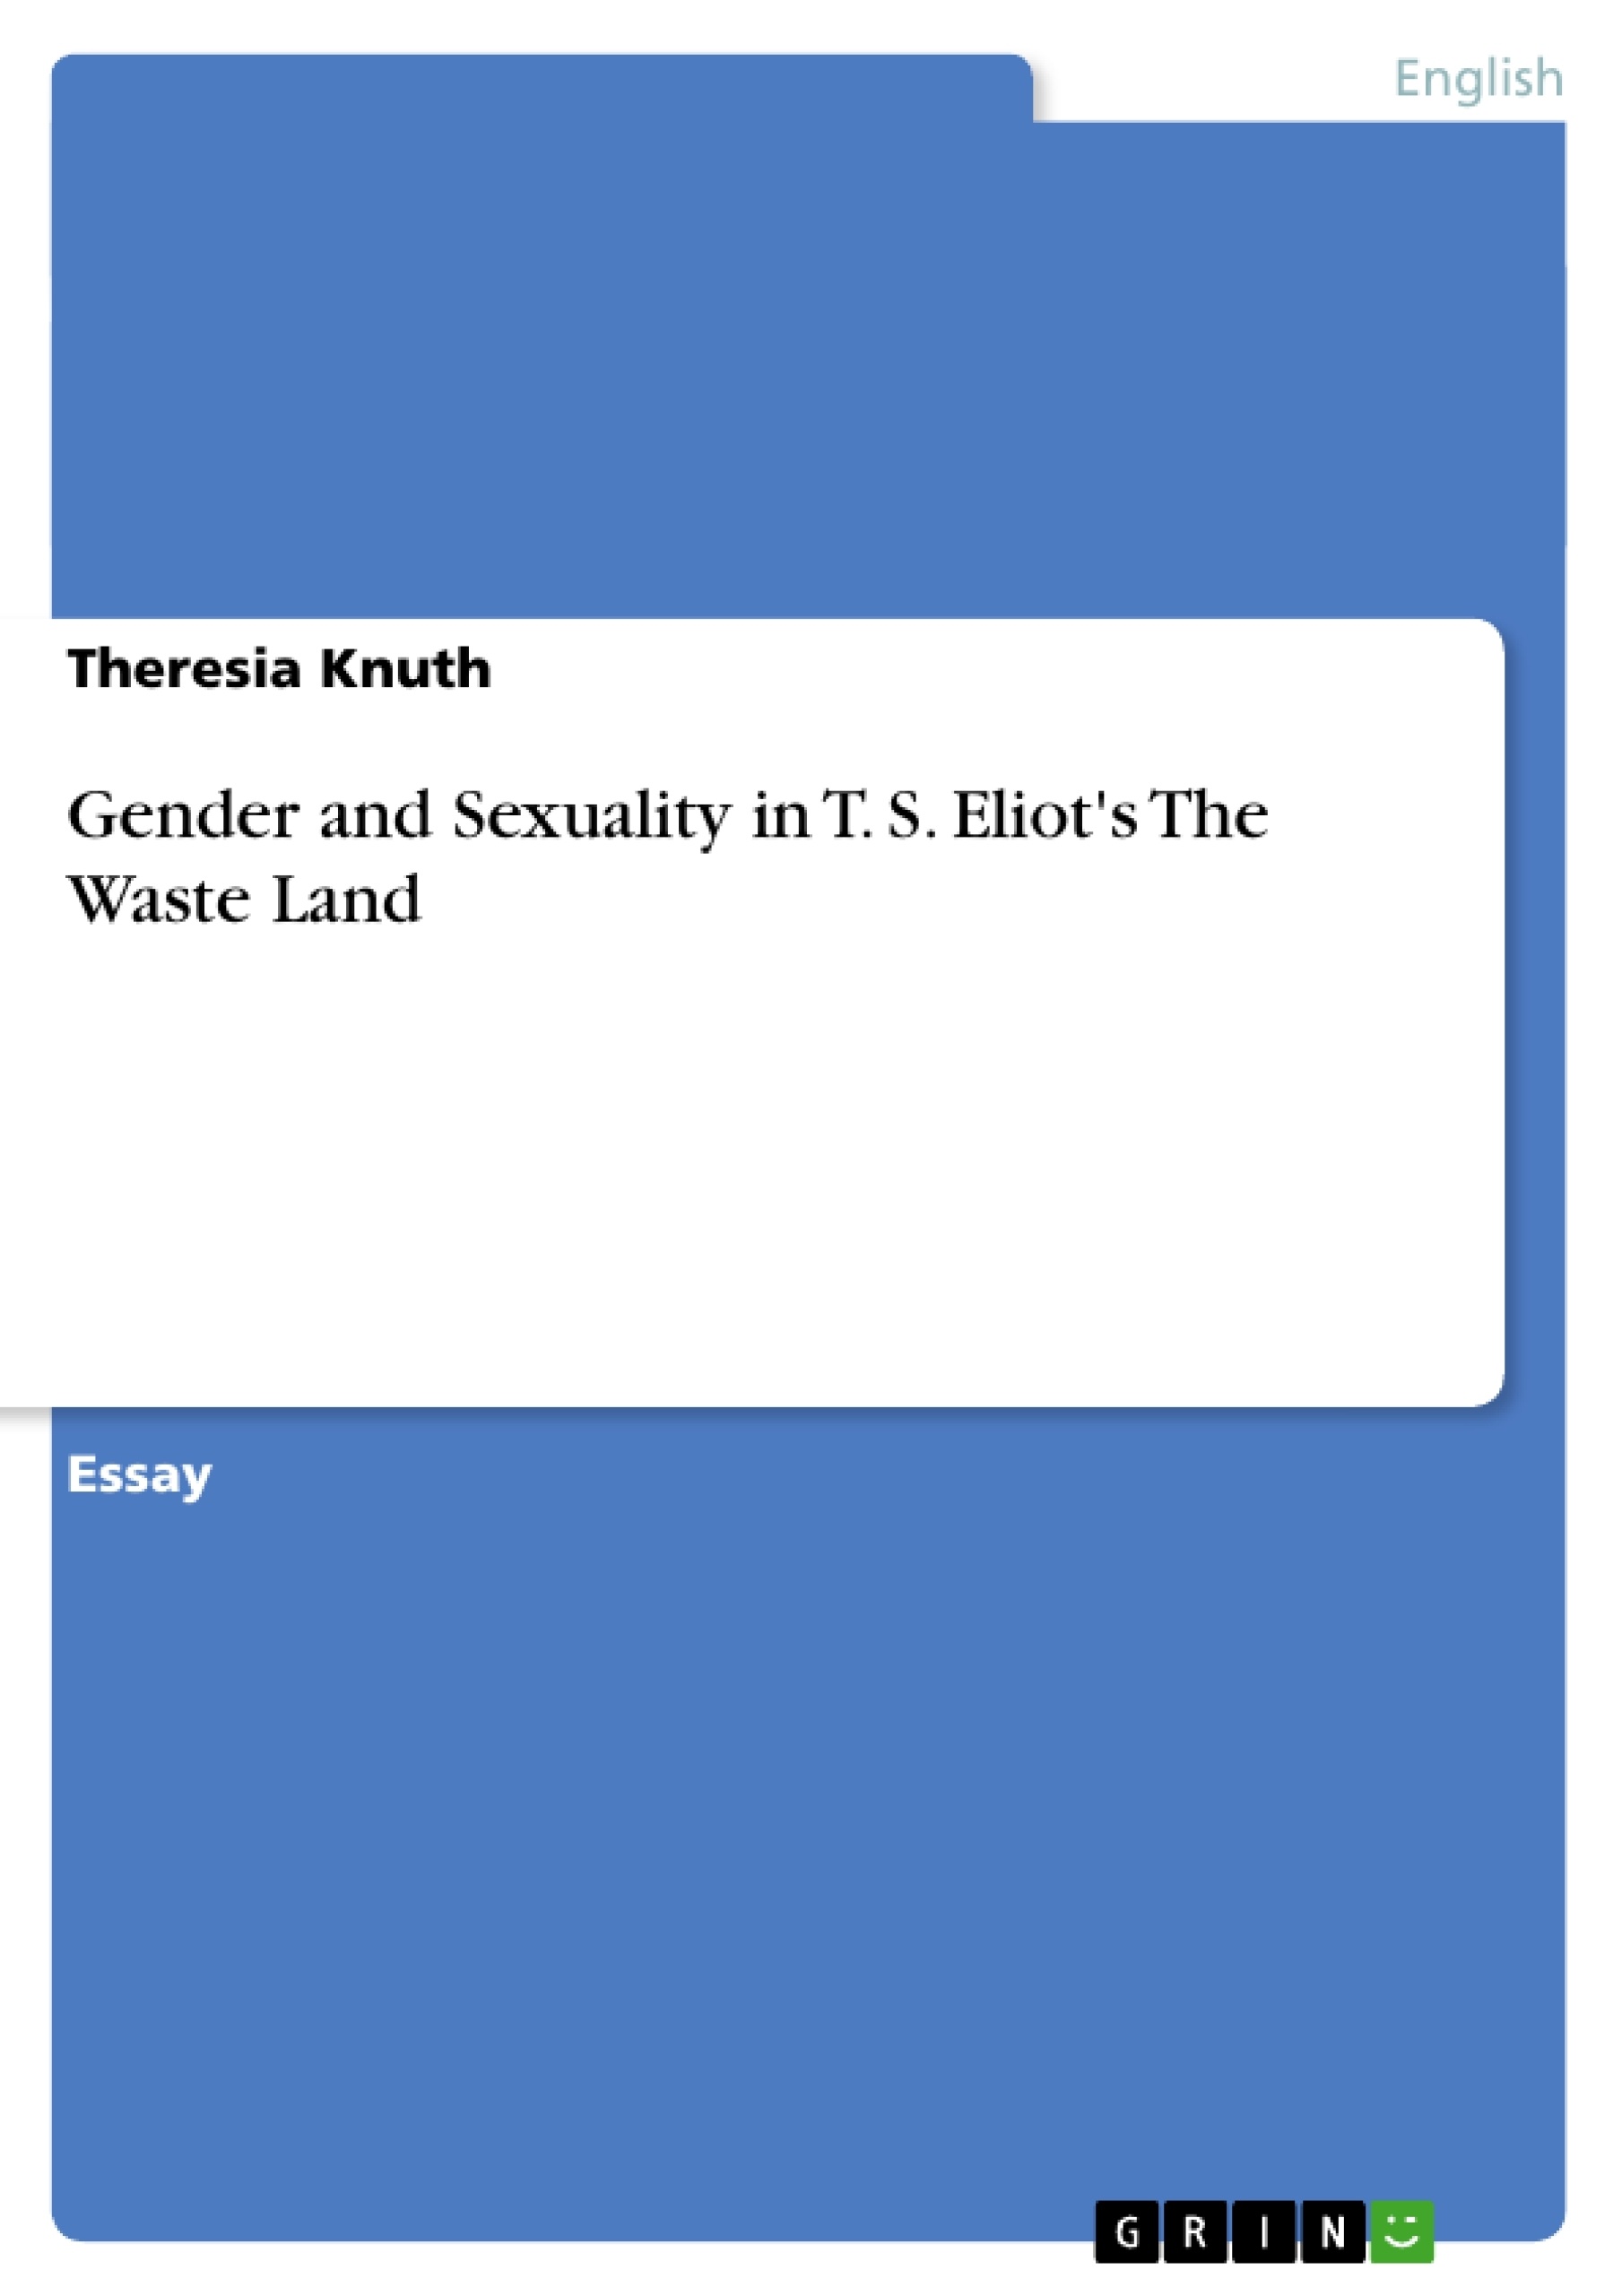 Title: Gender and Sexuality in T. S. Eliot's The Waste Land